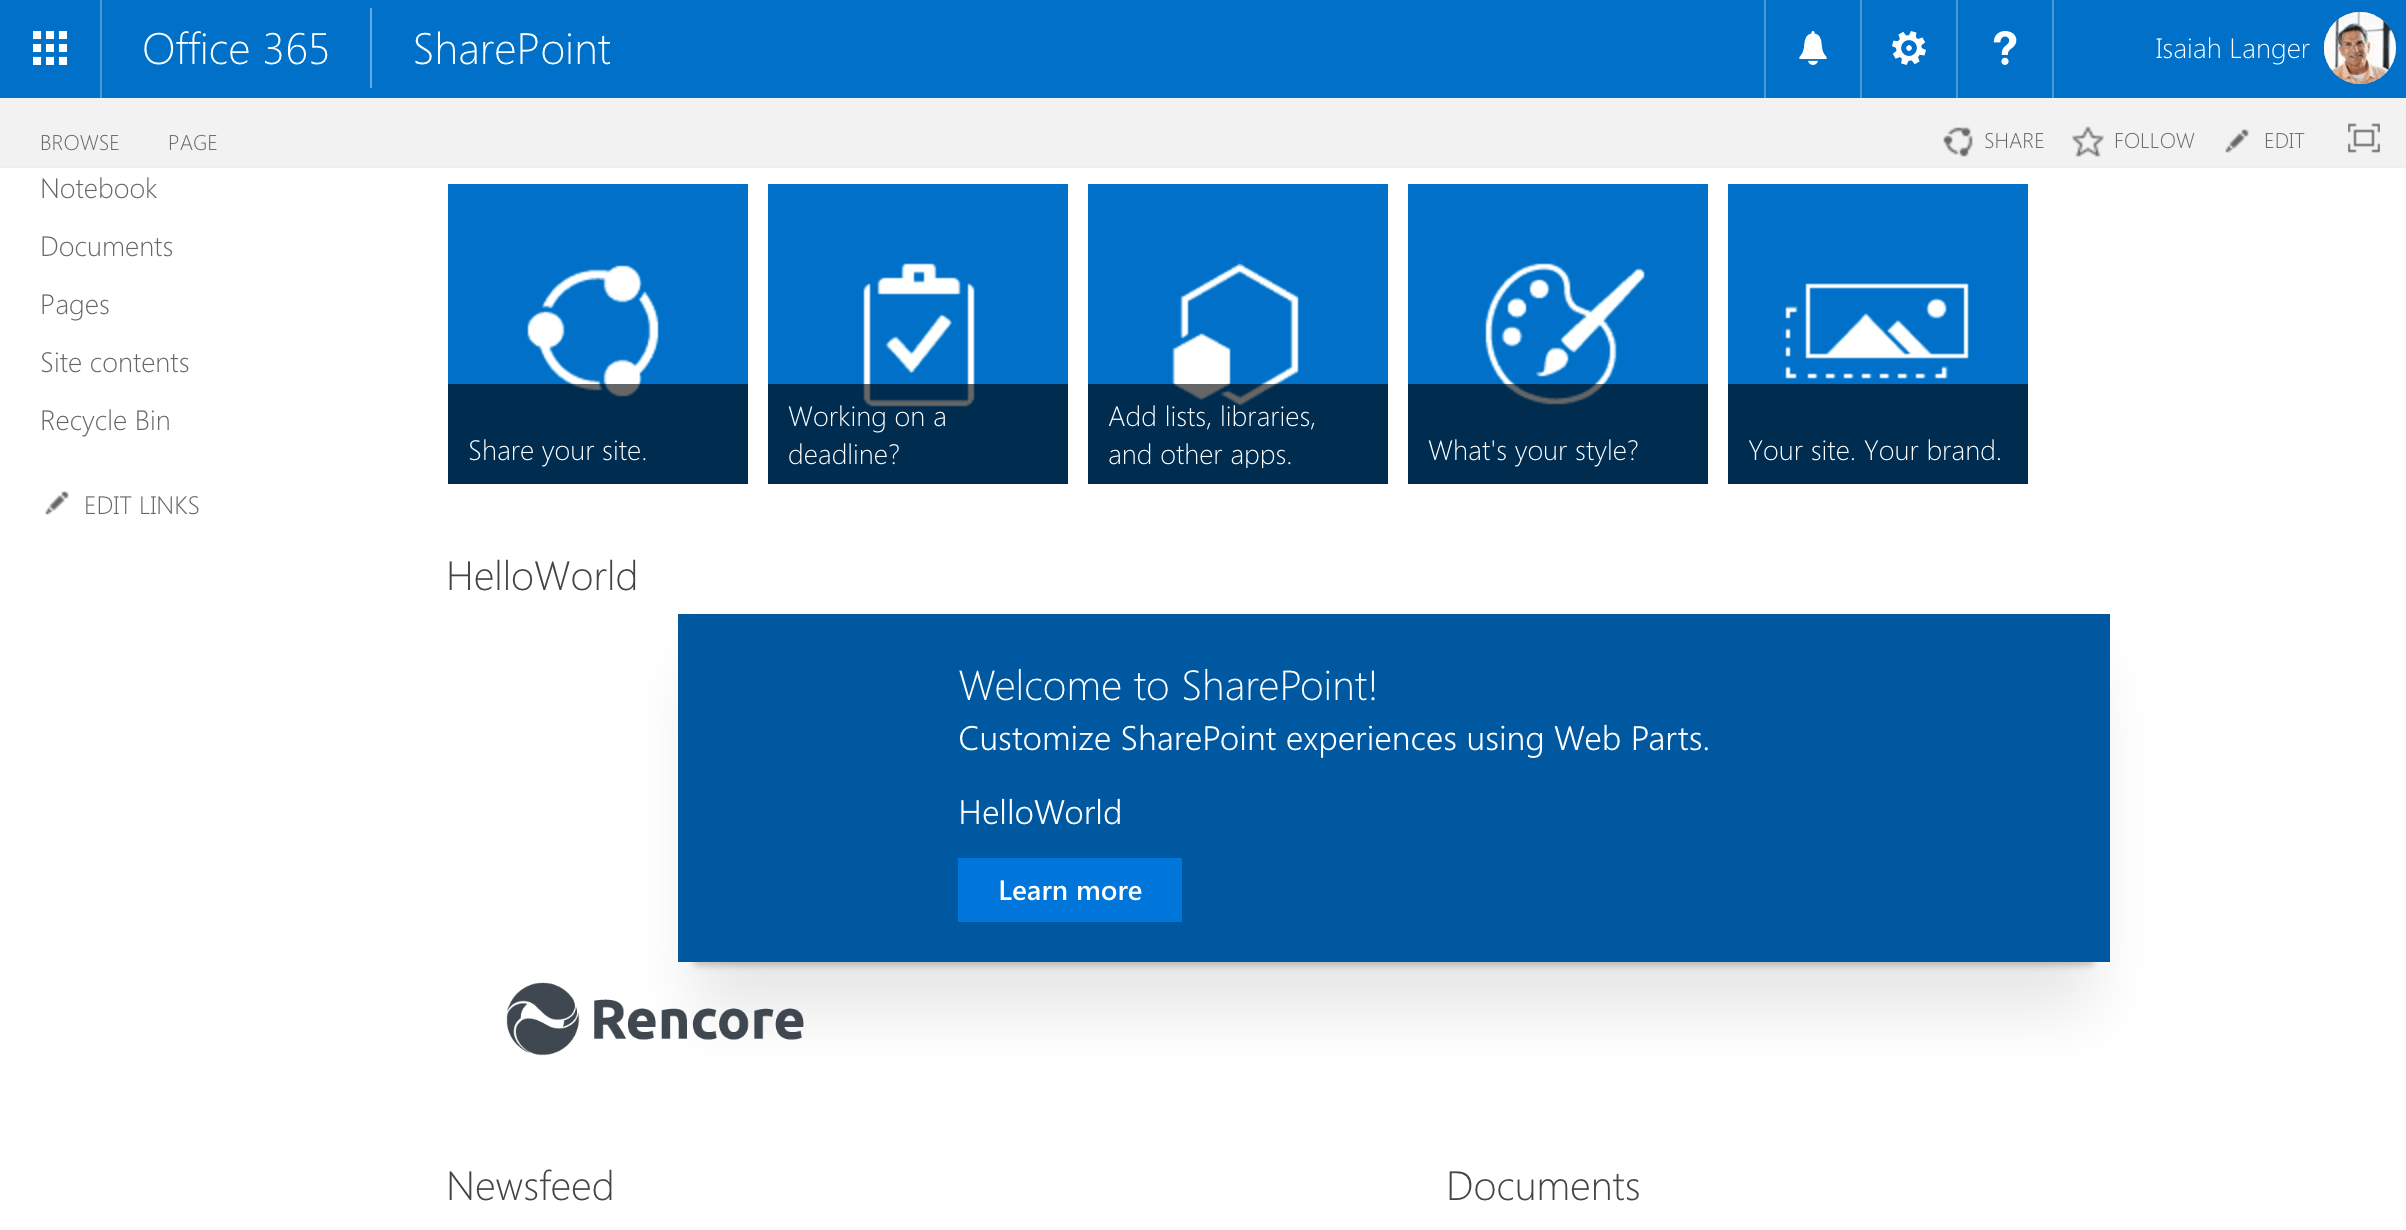 SharePoint Framework client-side web part on a classic page, showing the Rencore logo